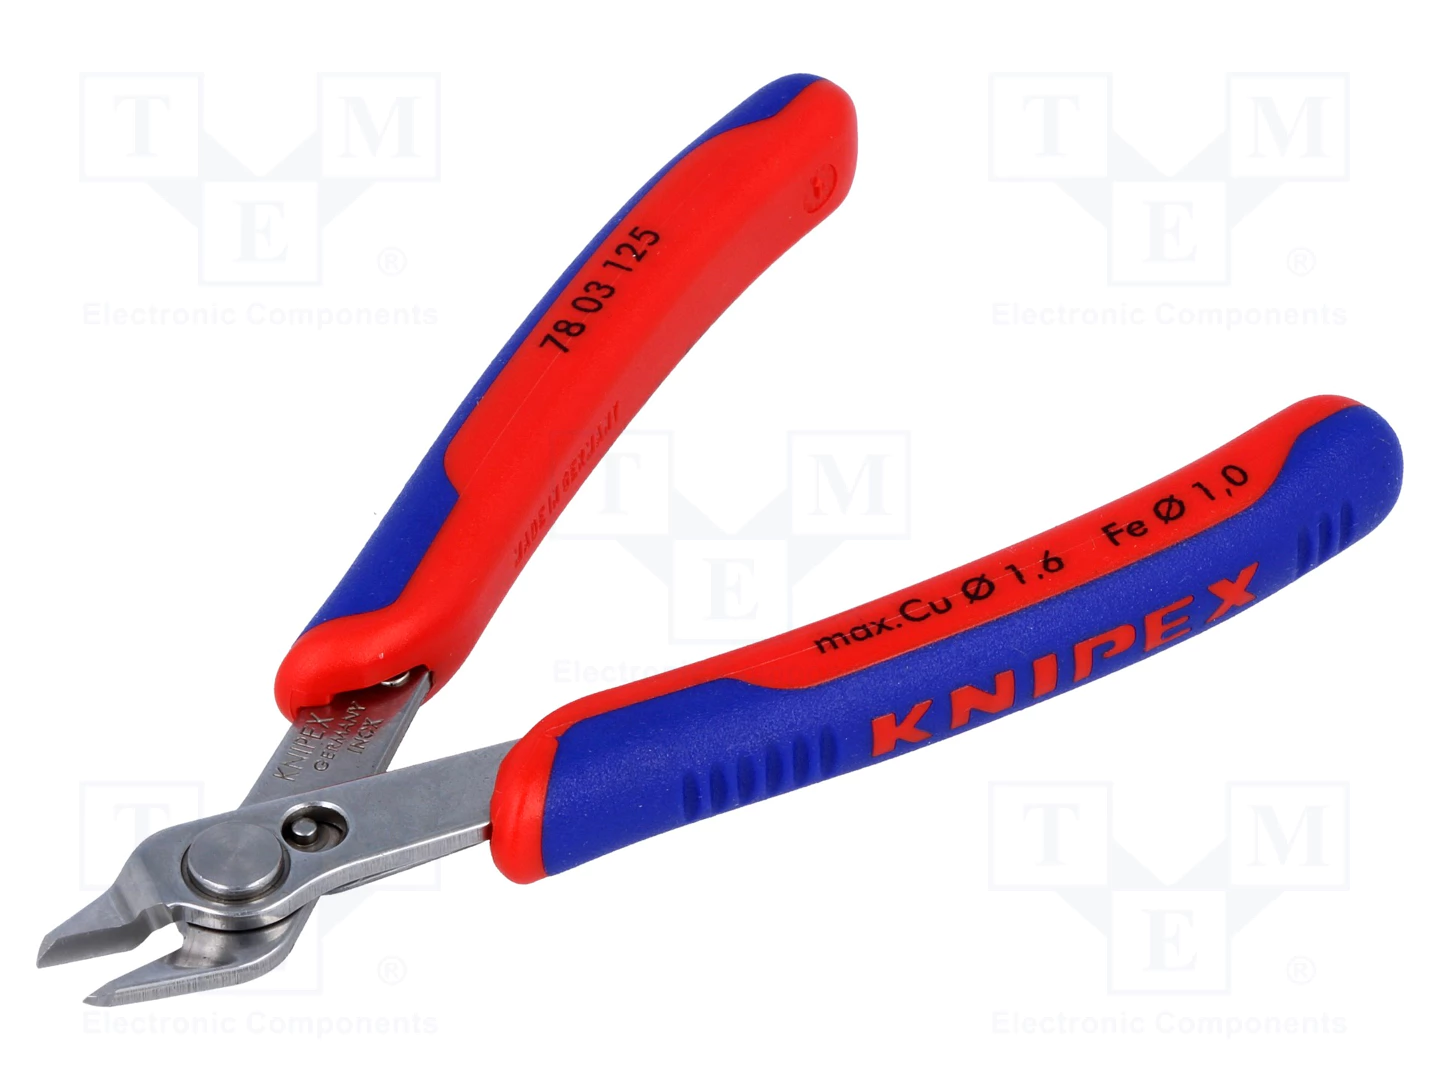 KNP.7803 - Side cutters, precision 125mm